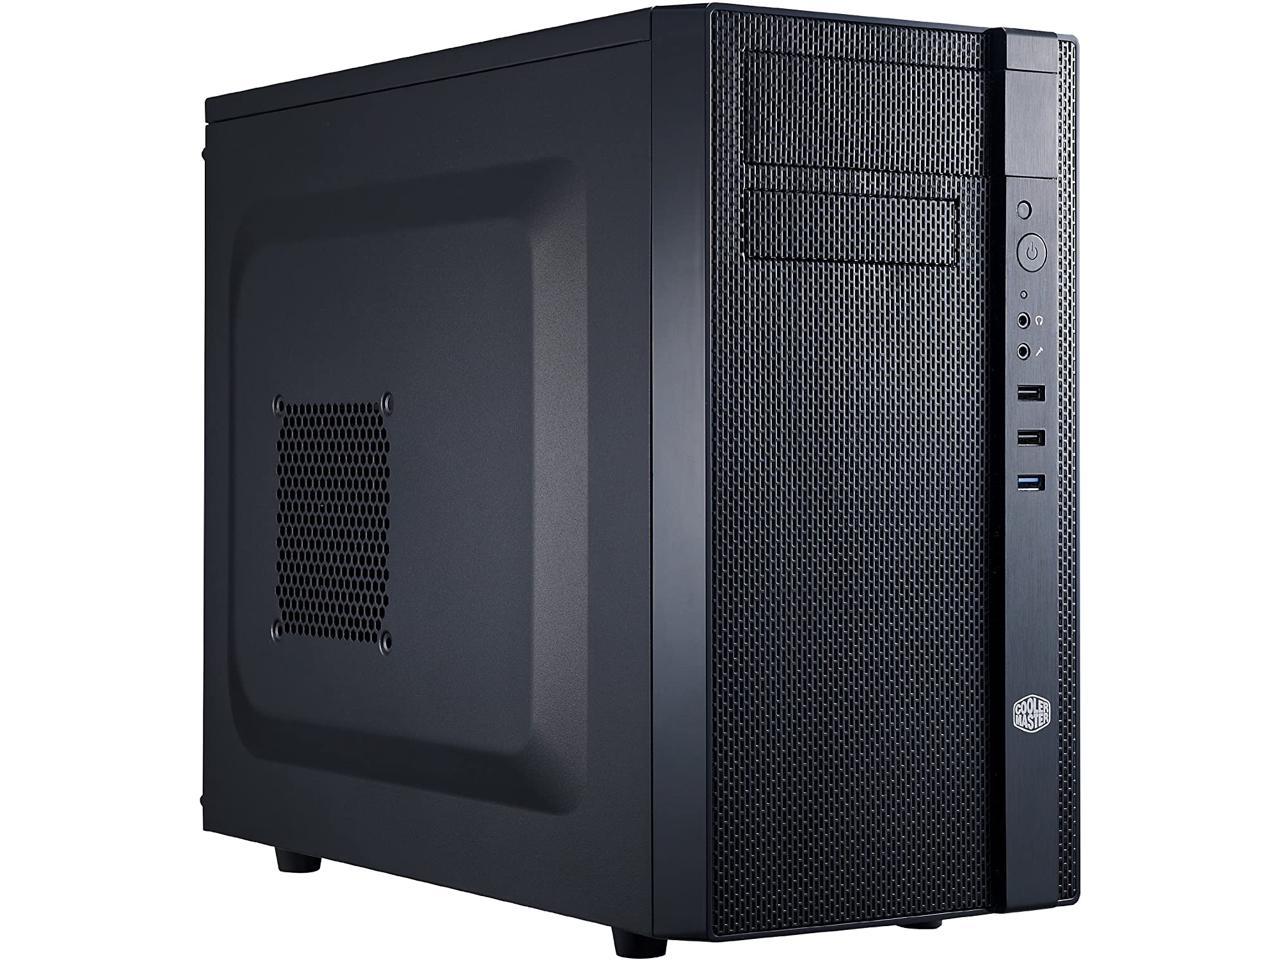 cooler-master-n200-mini-tower-computer-case-with-fully-meshed-front